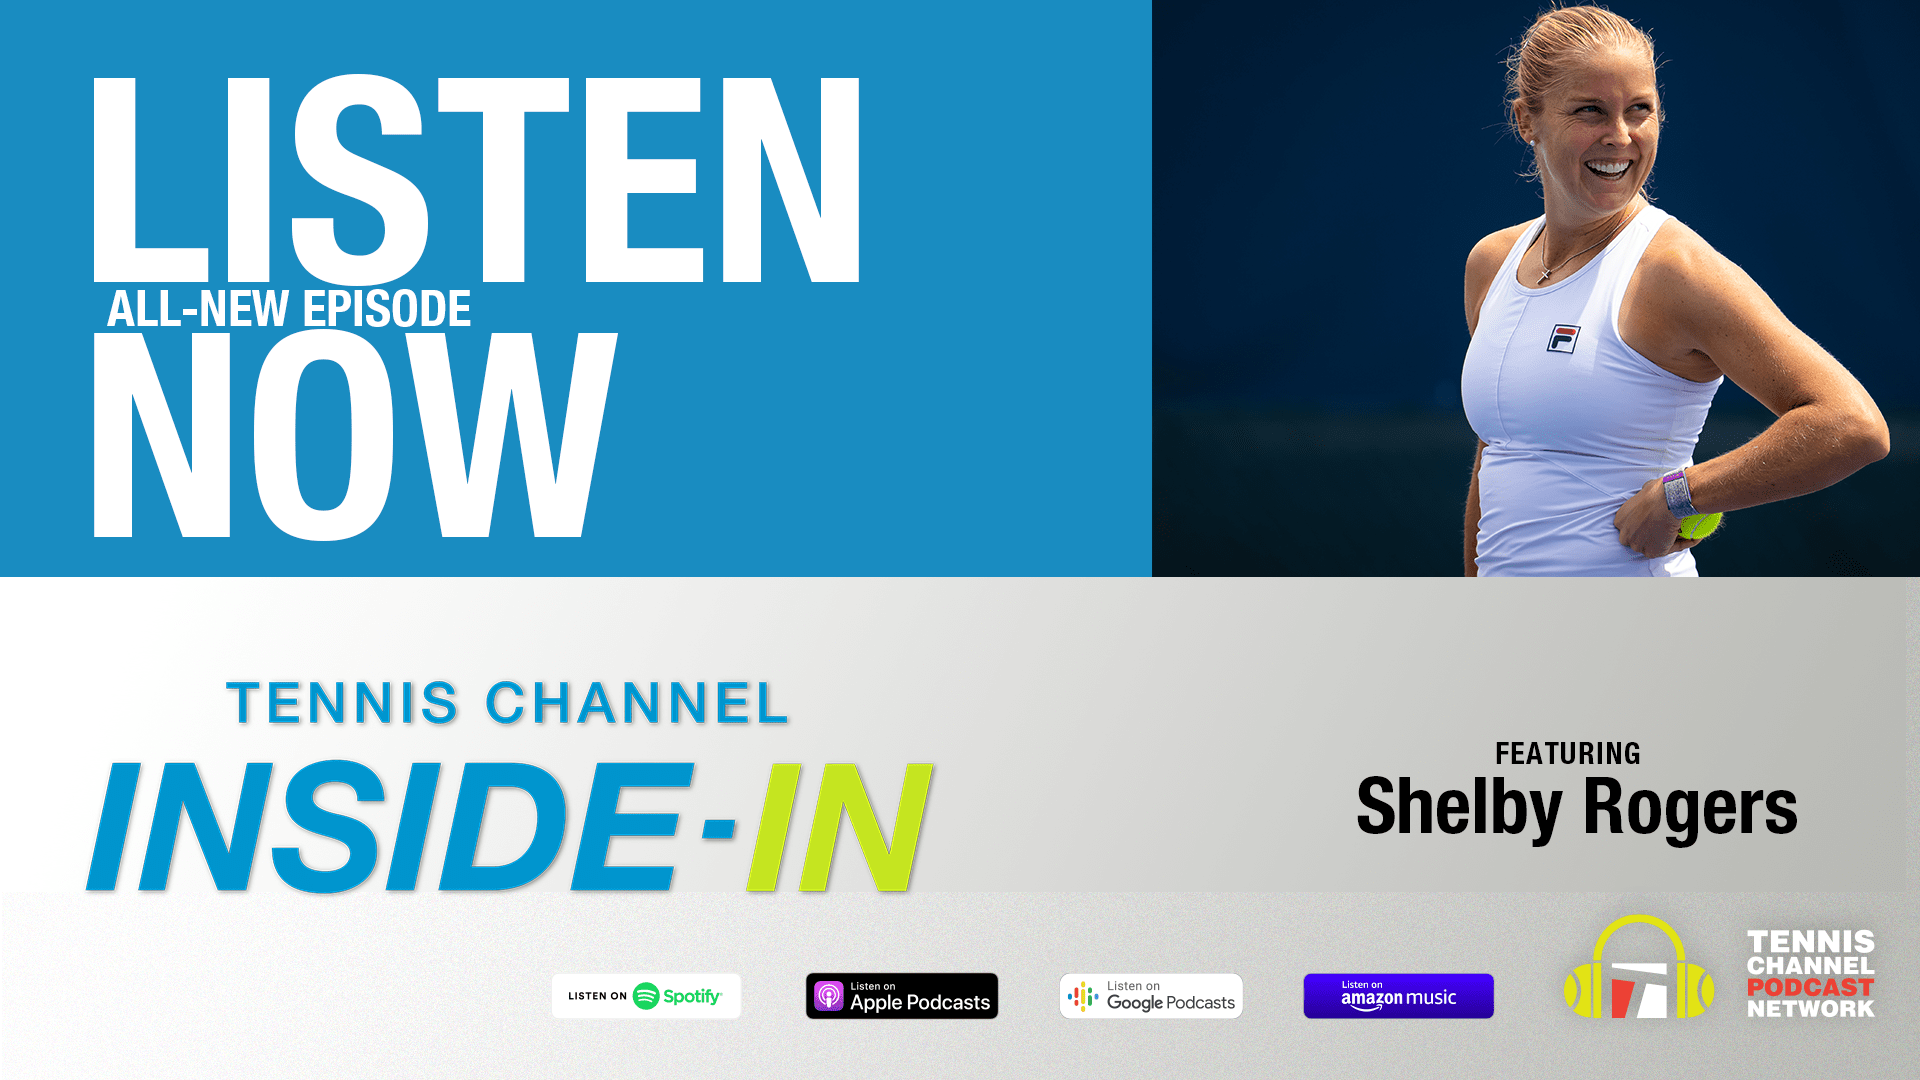 Tennis Channel Inside-In Shelby Rogers is still trusting the process and making her career count